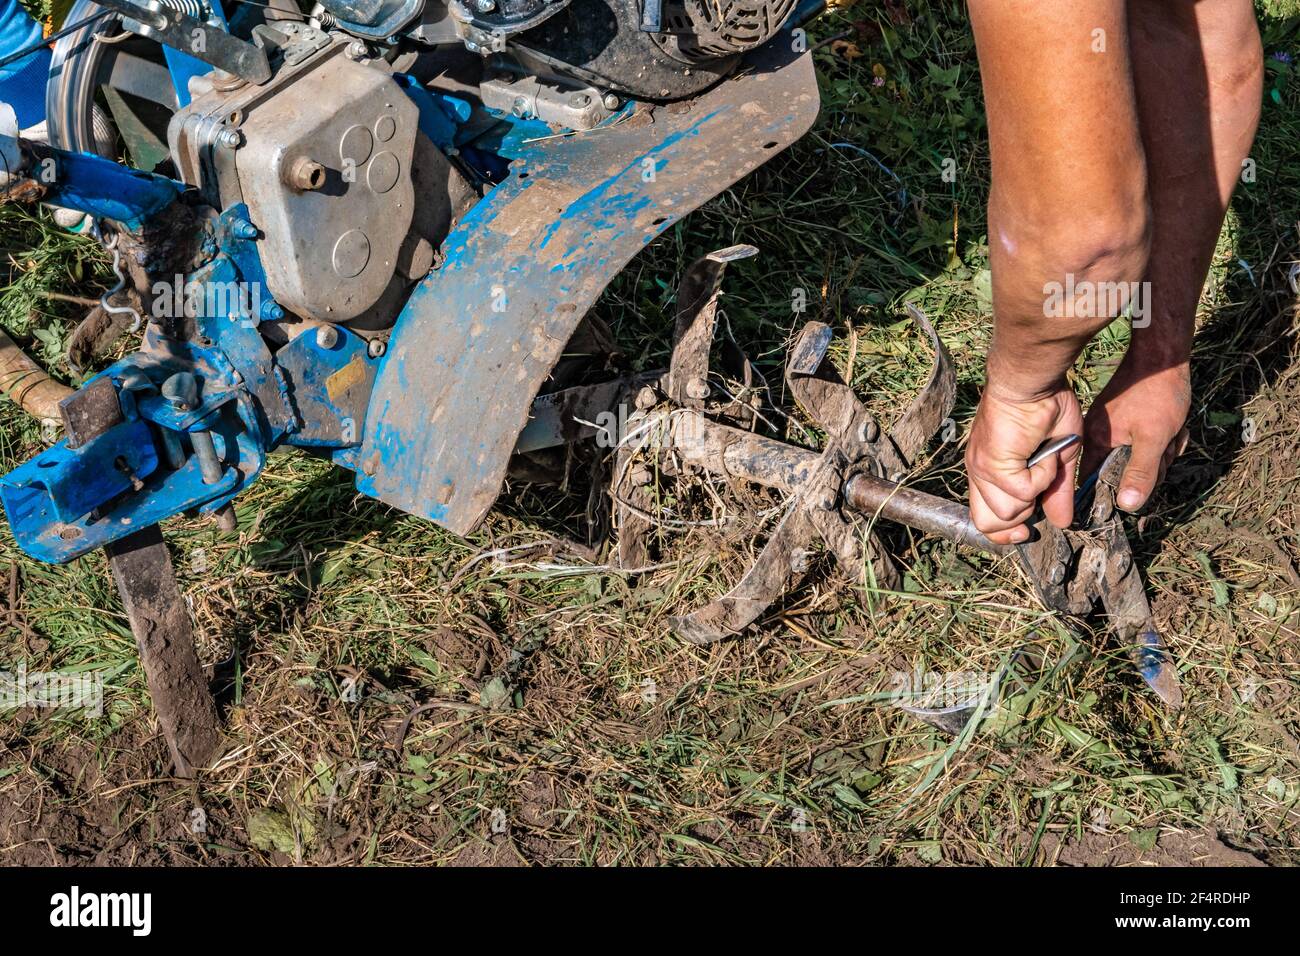 An unrecognizable farmer repairs a hand-held motor plow. Agricultural machinery: cultivator for tillage in the garden, motorized hand plow. Authentic Stock Photo